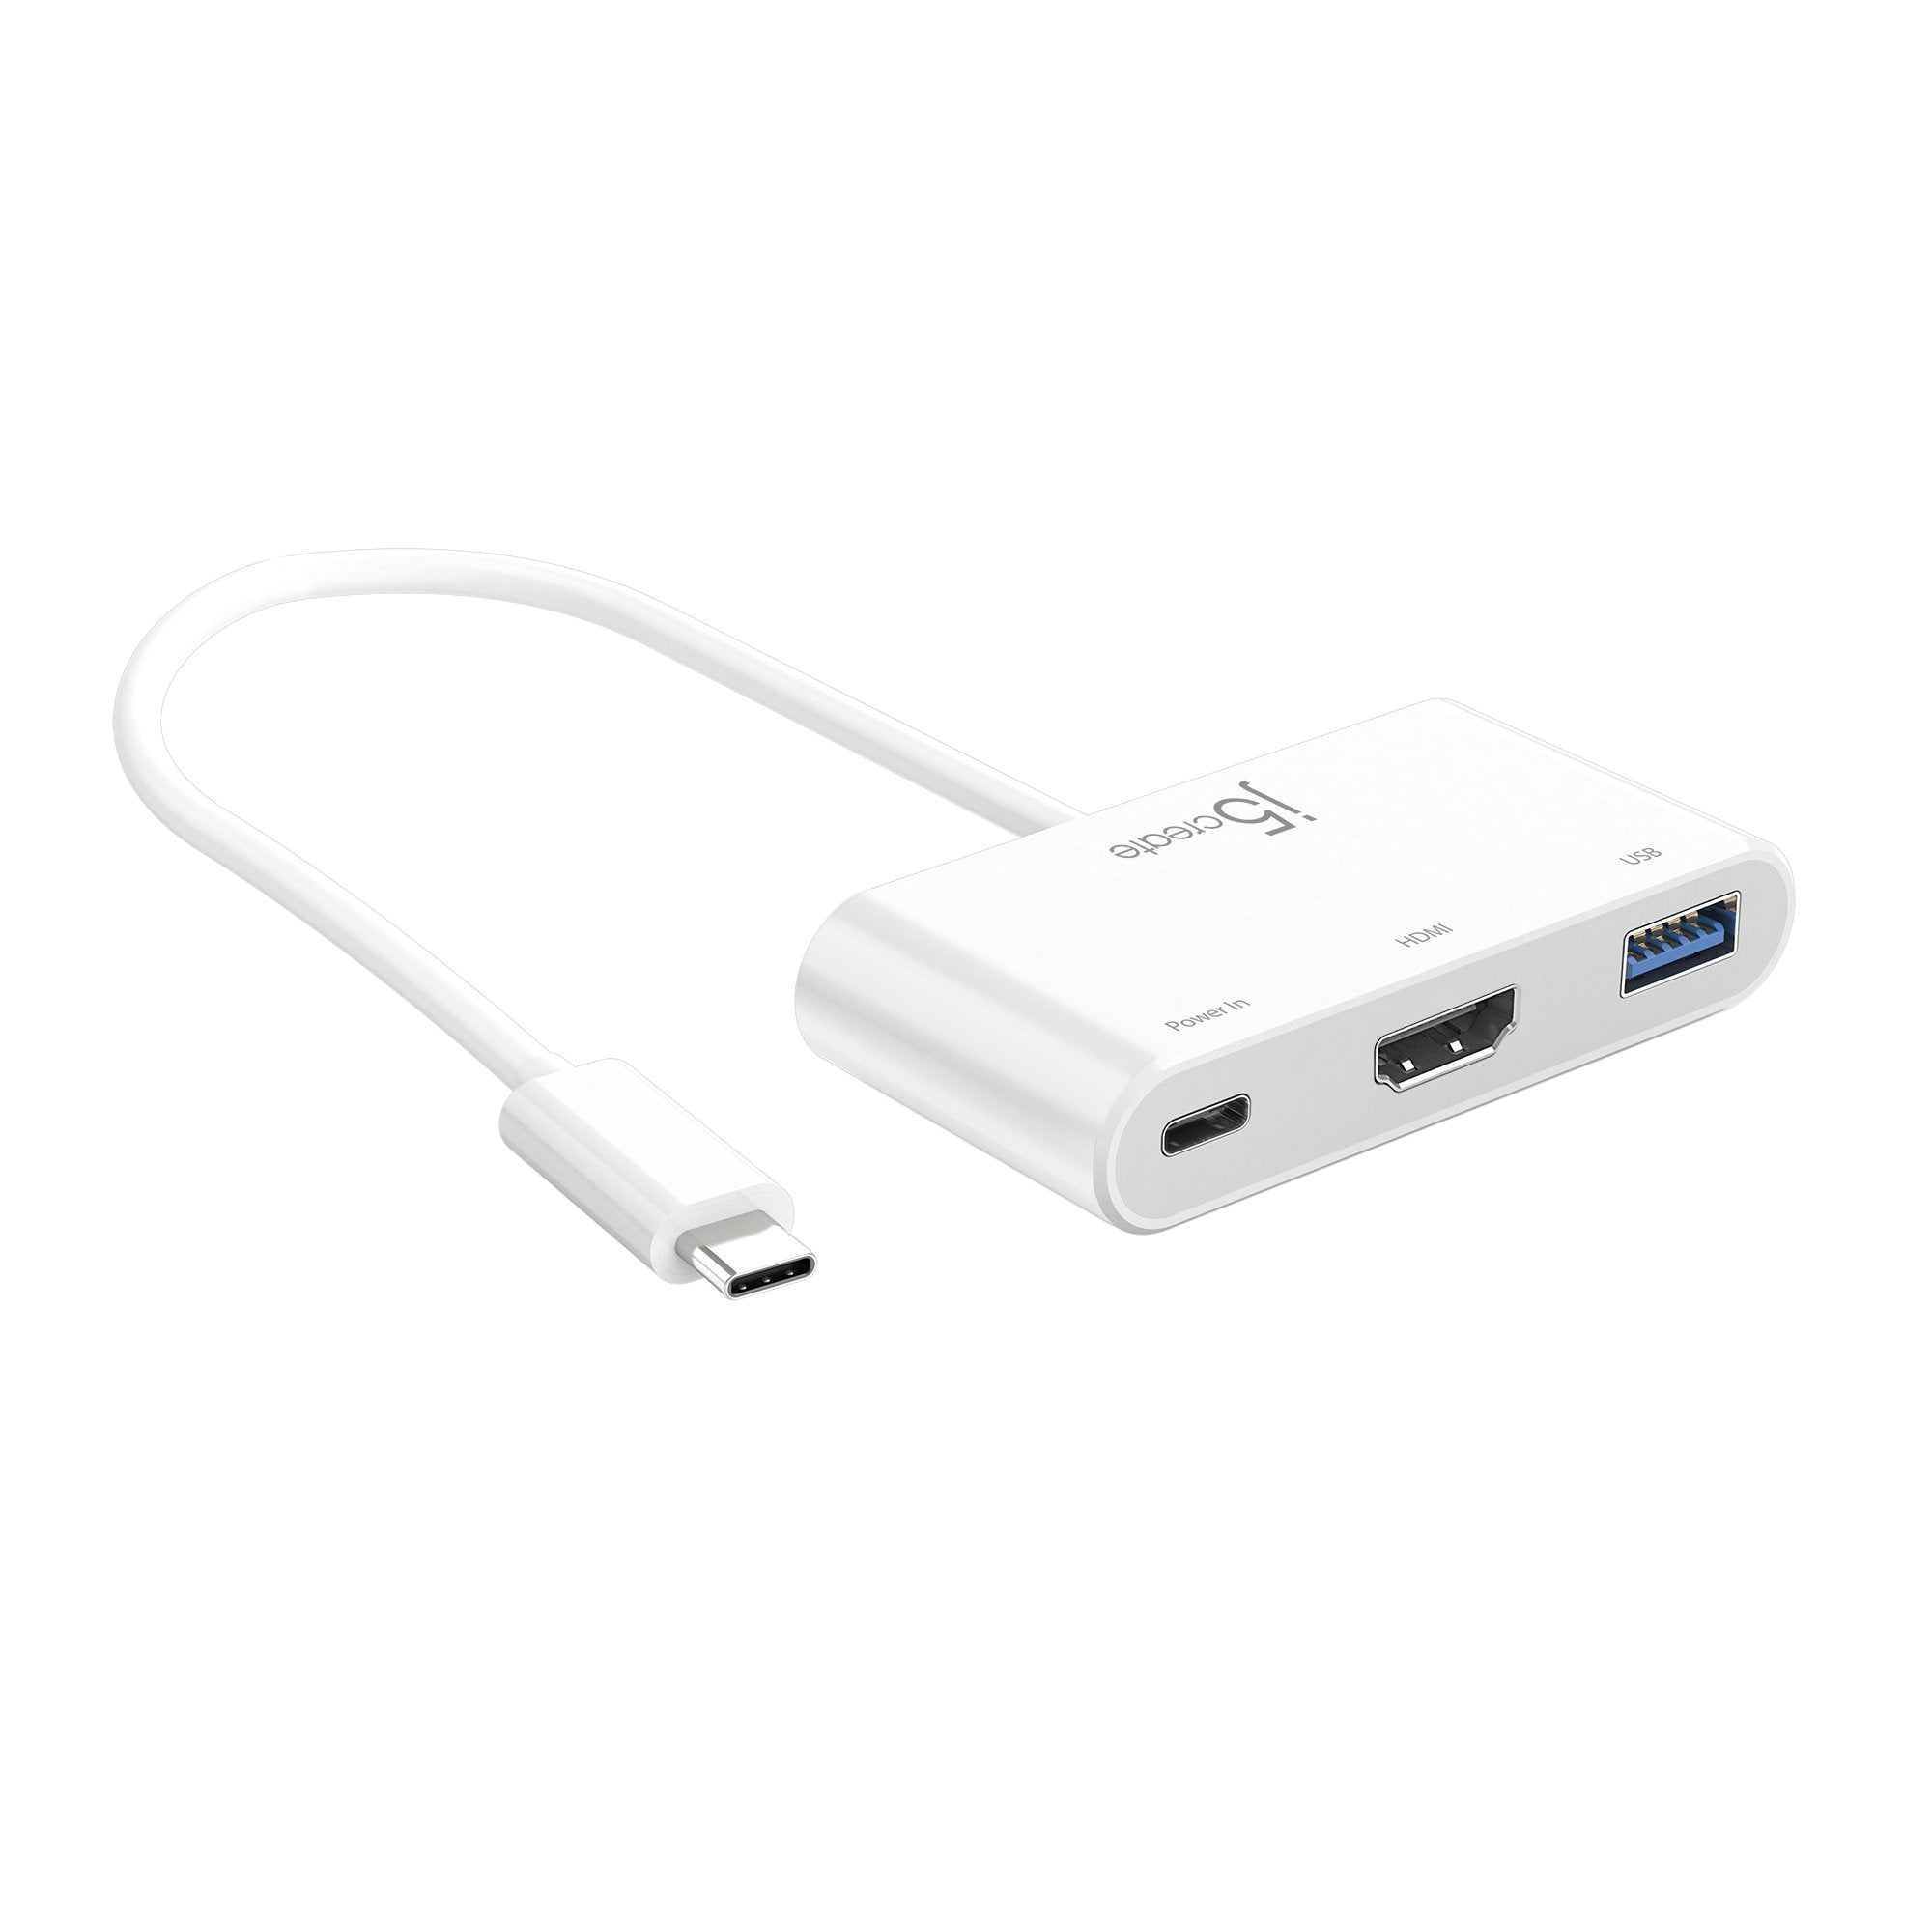 HDMI™ & USB™ 3.0 with Power Delivery j5create